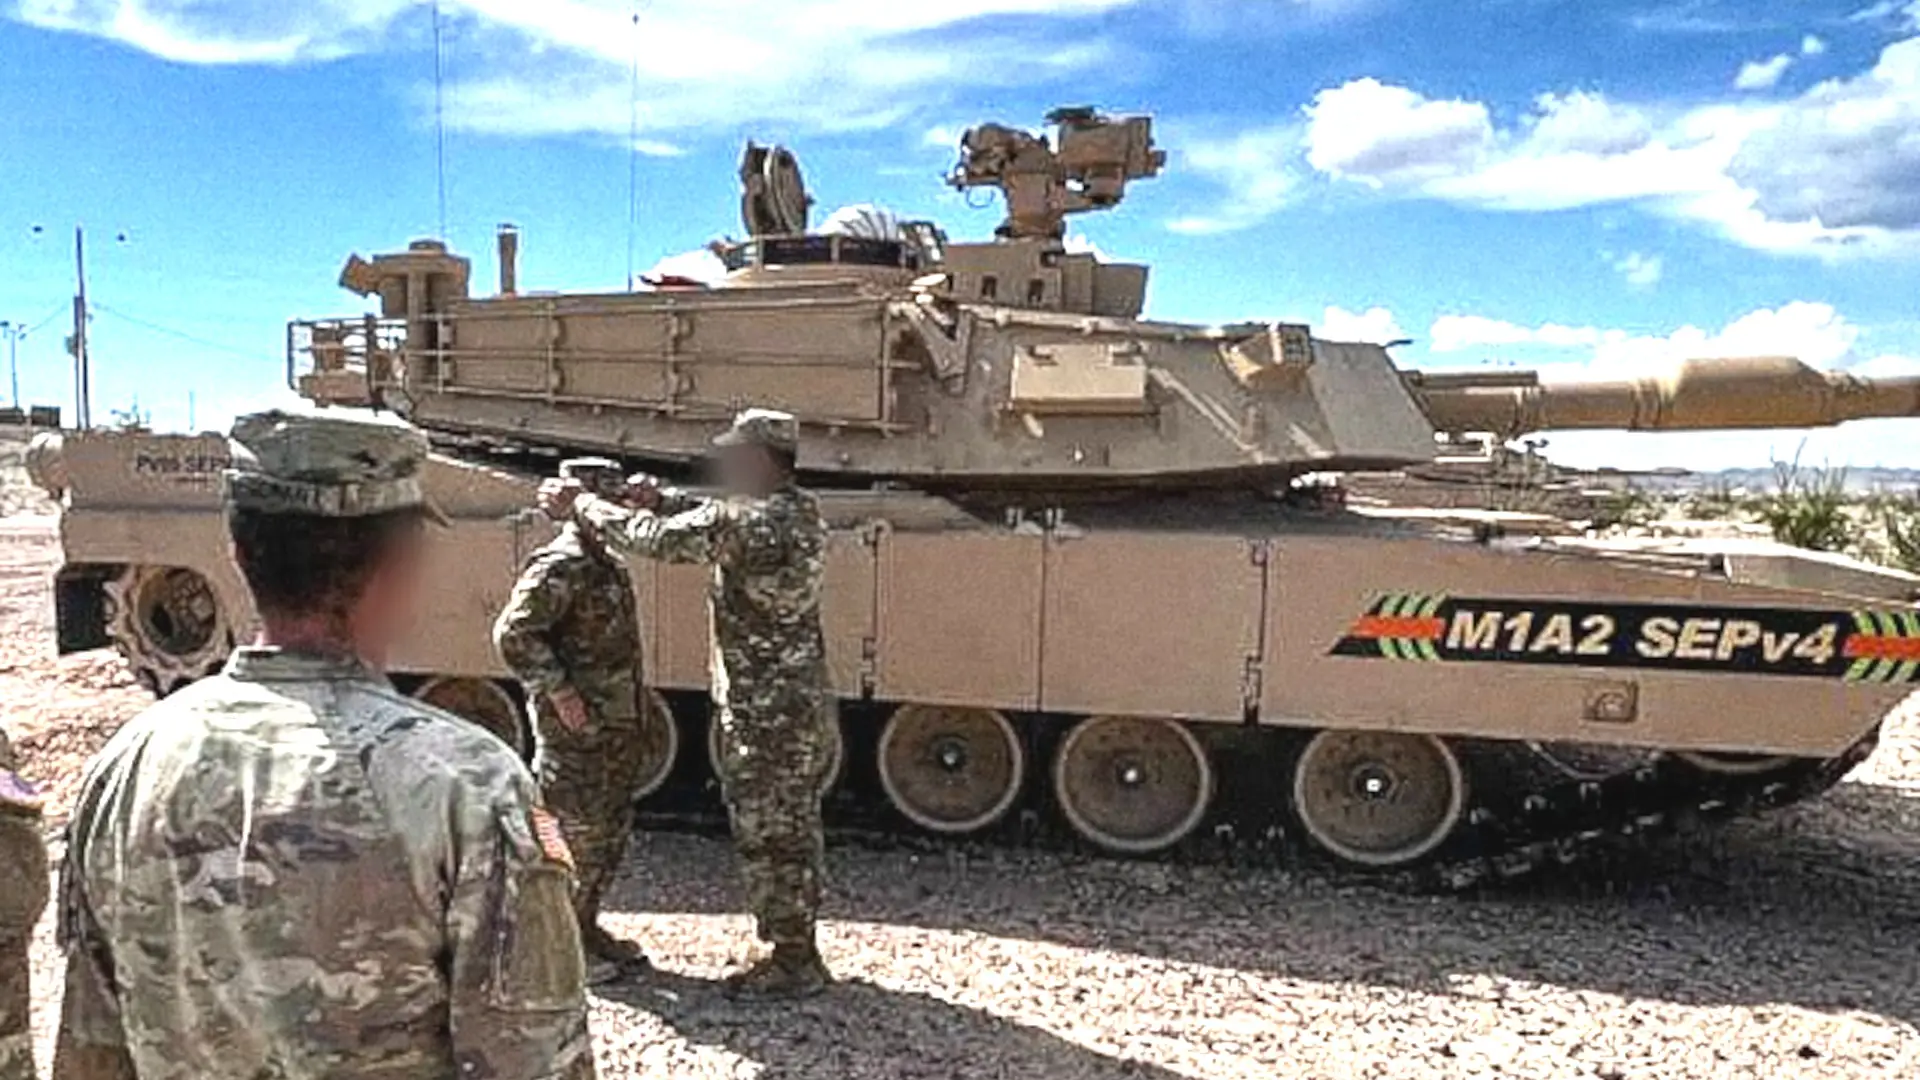 The US Army is testing a prototype M1A2 SEPv4 Abrams tank in Arizona and hopes to field the first operational examples in Fiscal Year 2025.